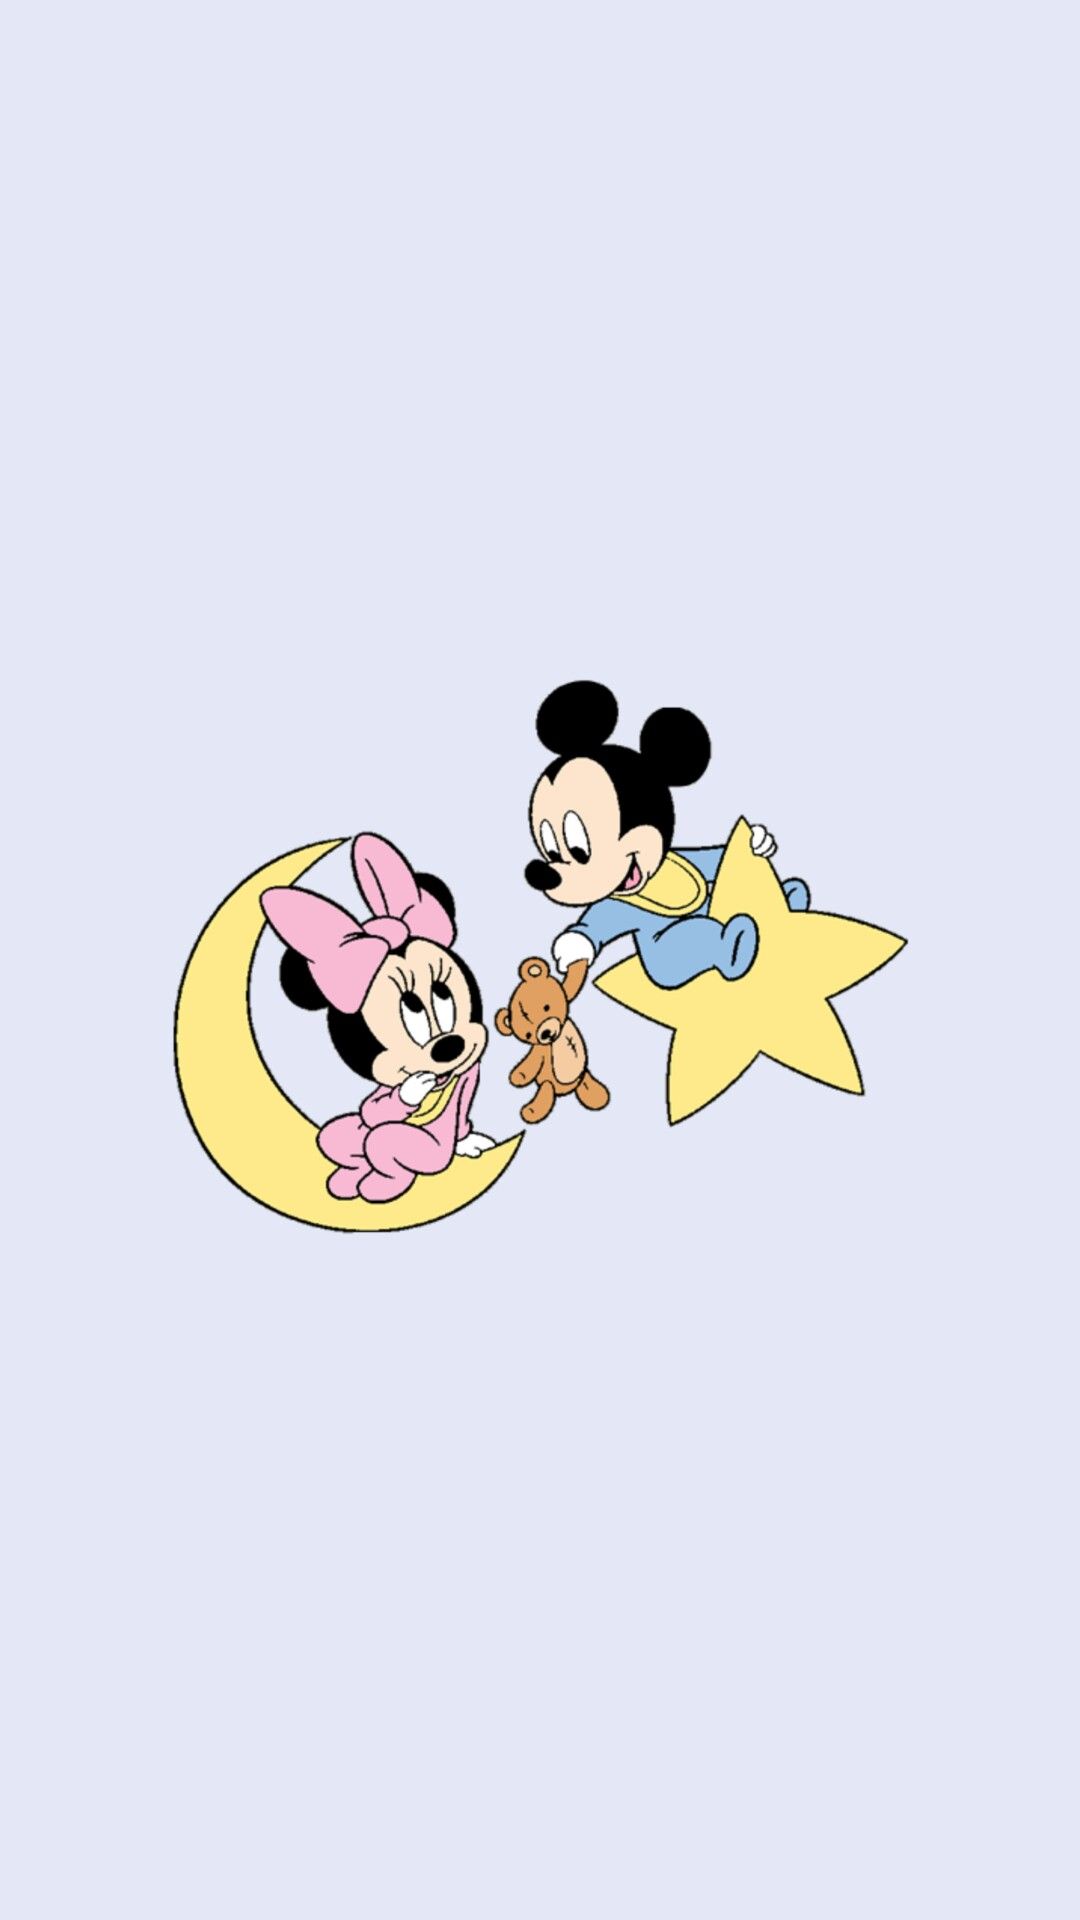 Mickey mouse and minnie mouse wallpaper for phone - Mickey Mouse